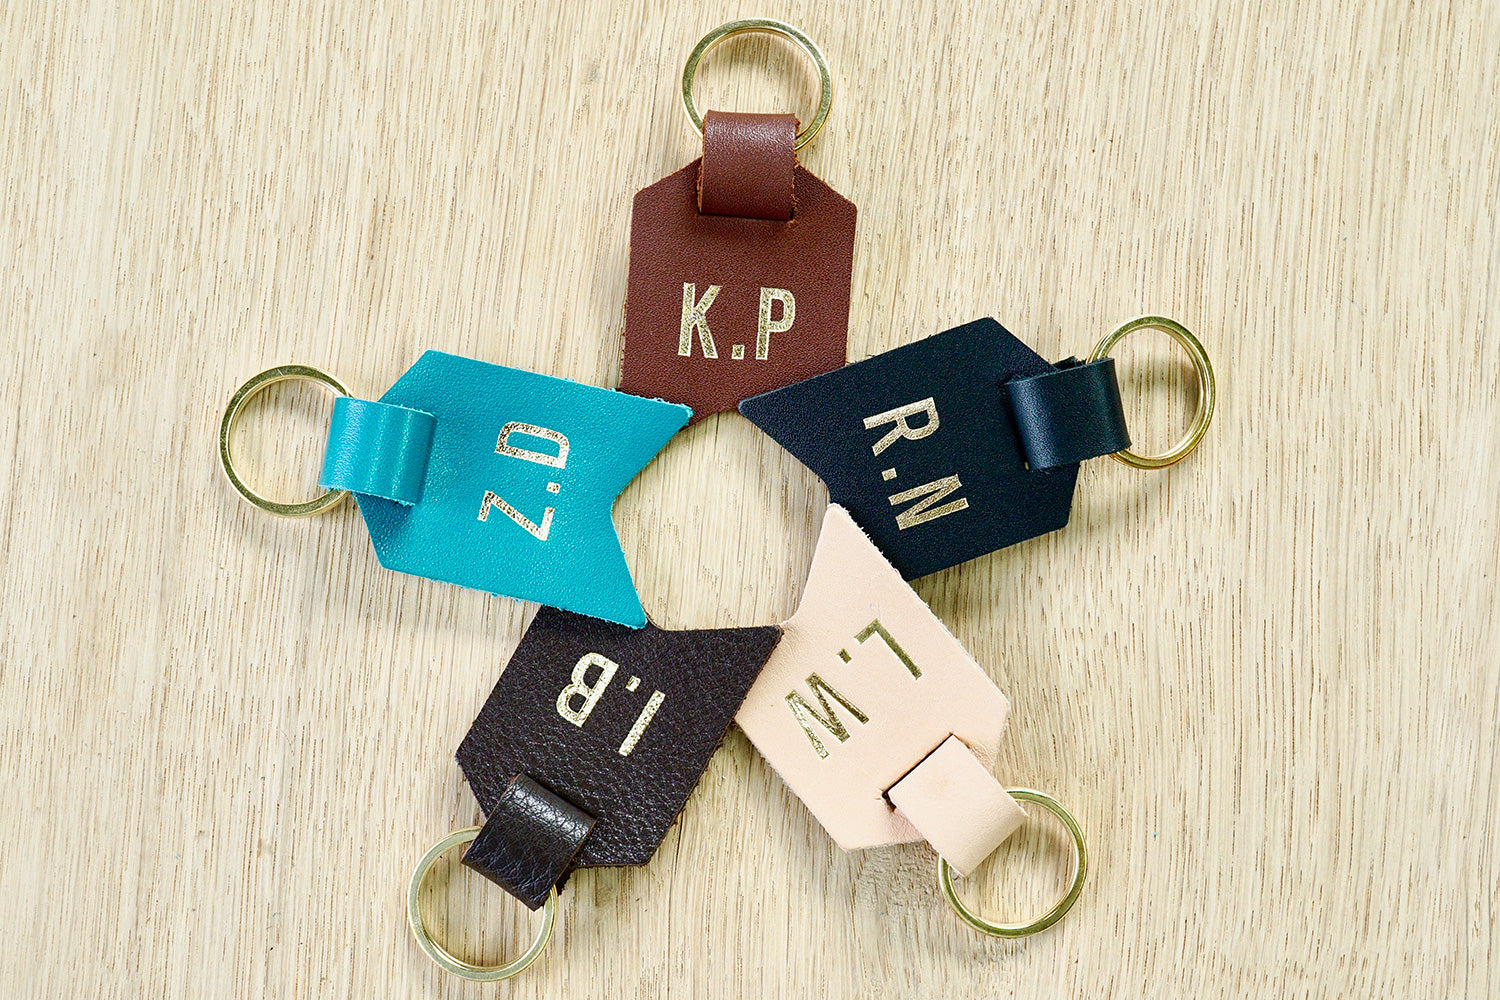 Monogram keychain from Bookshell bindery available in black leather, turquoise blue leather, dark brown leather, light brown leather, Natural (pale pink)